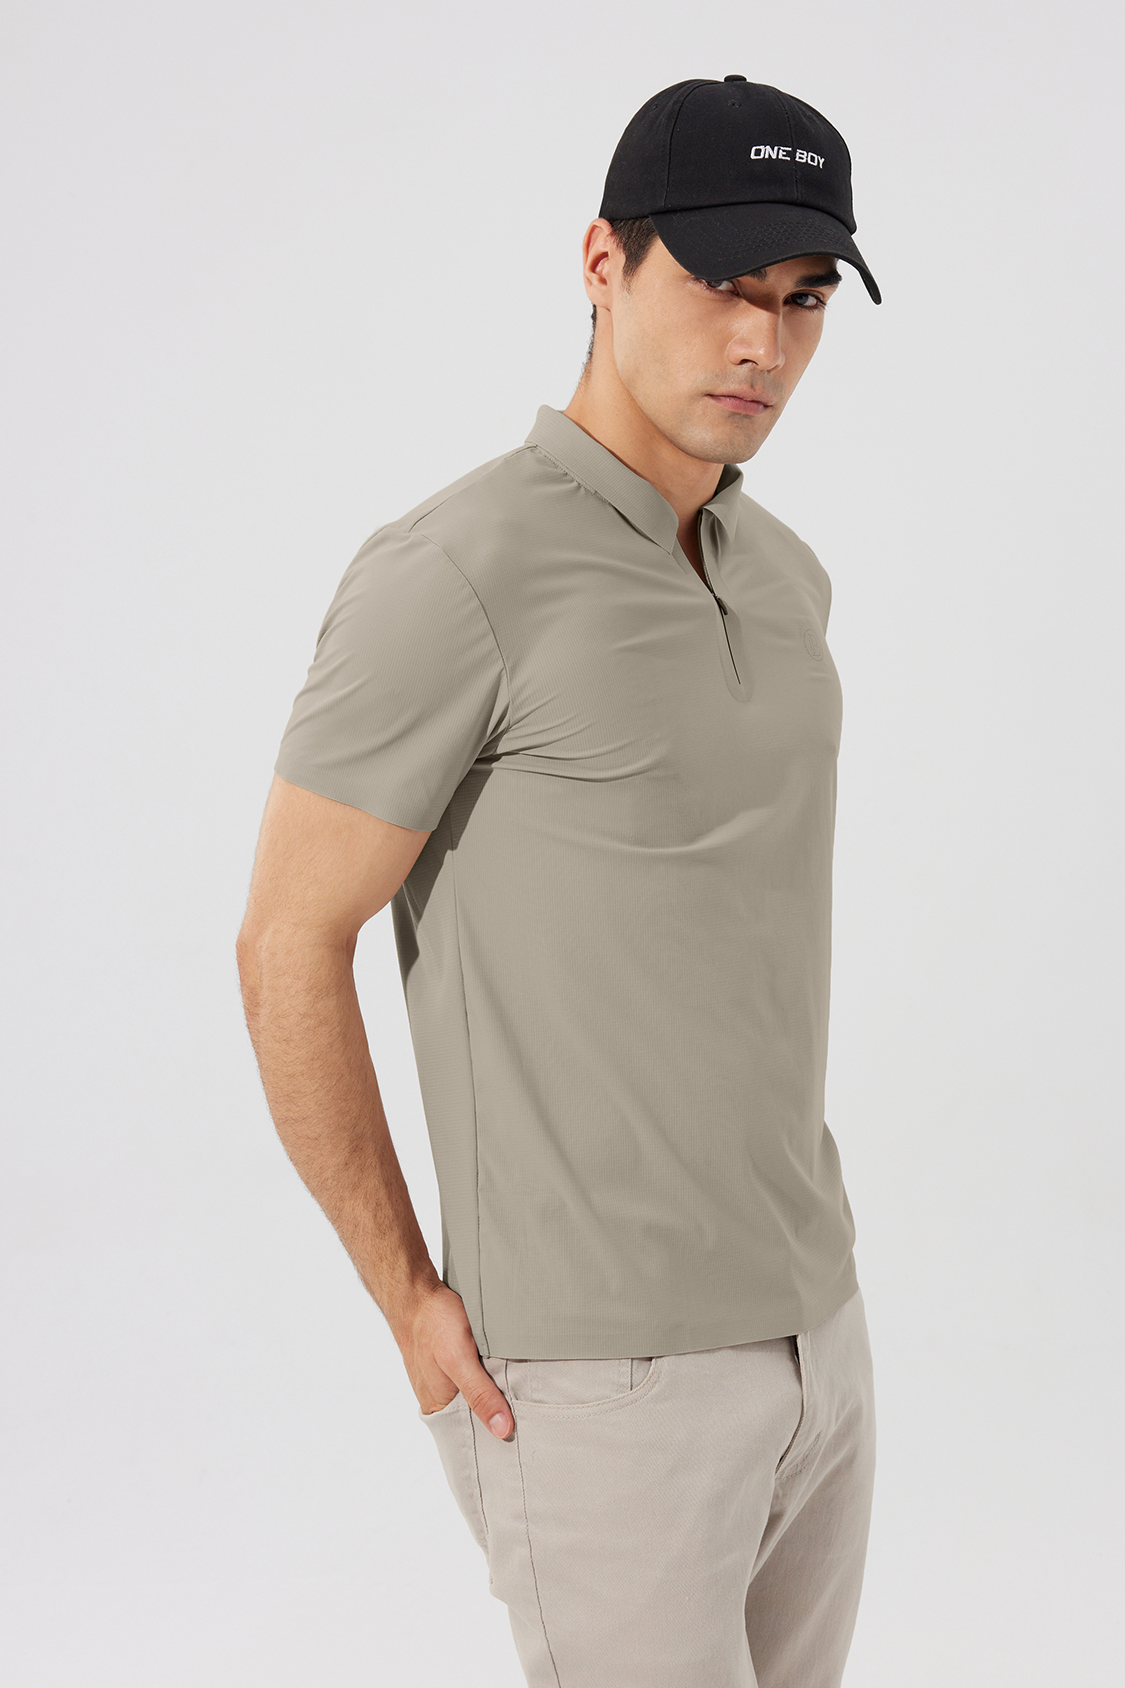 Ice-Tech Seamless Heat-Pressed Polo Shirt For Men